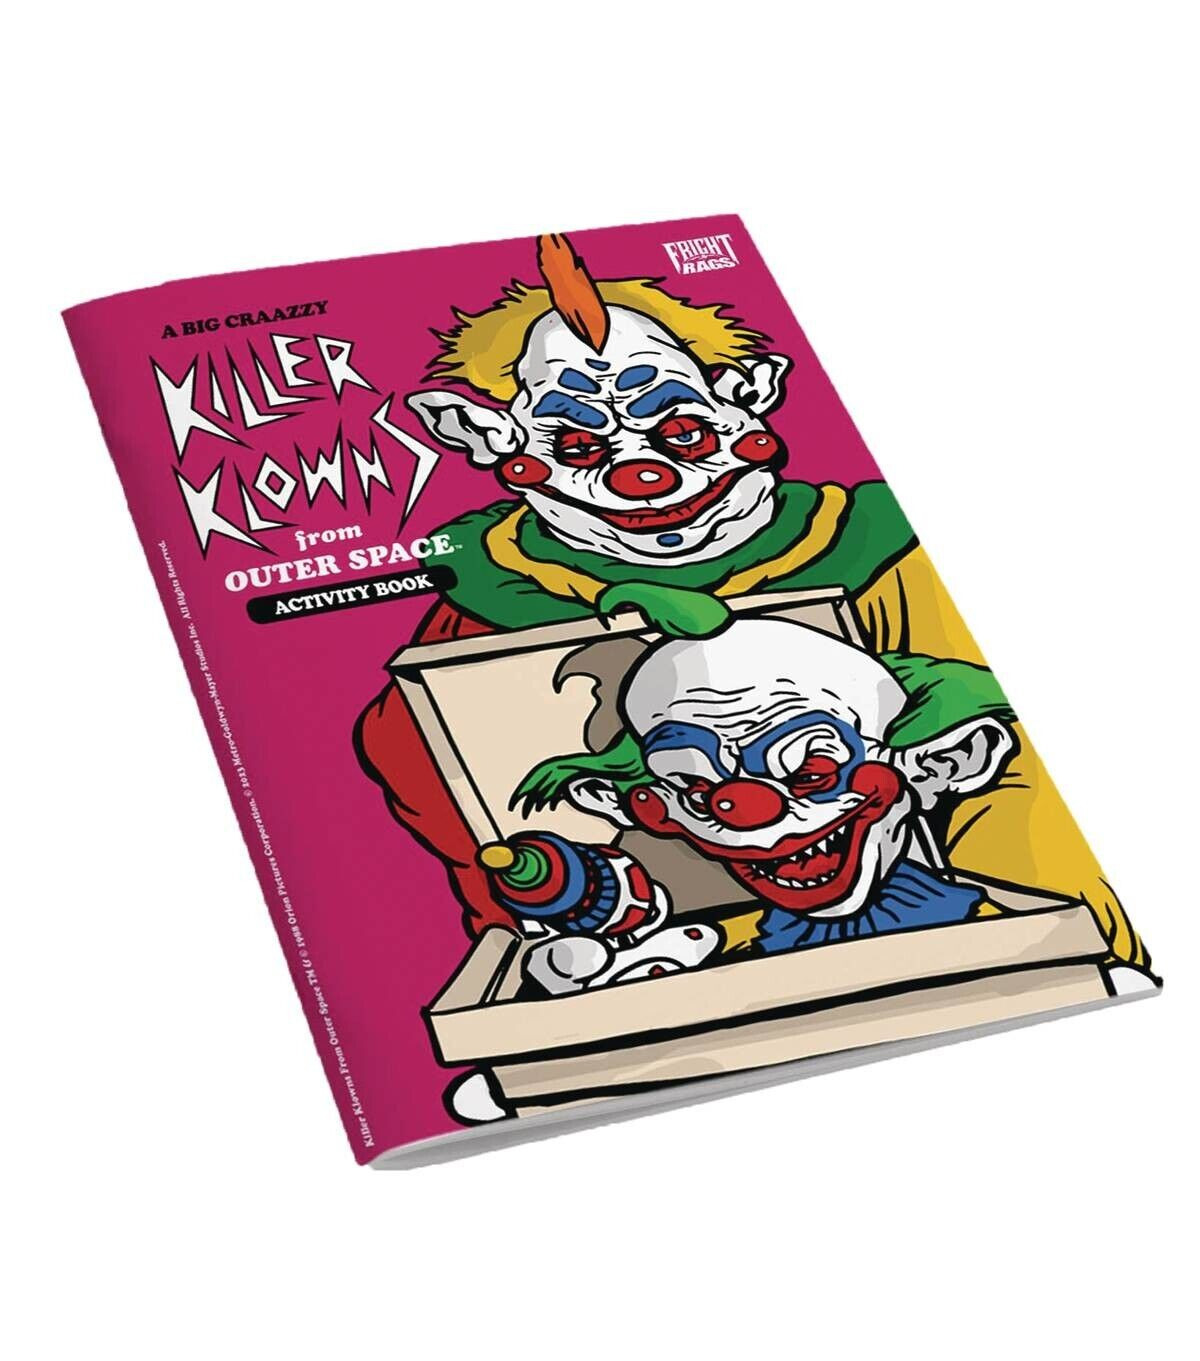 ⚰️ KILLER KLOWNS FROM OUTER SPACE ACTIVITY BOOK BY FRIGHT RAGS *7/31/24 PRESALE